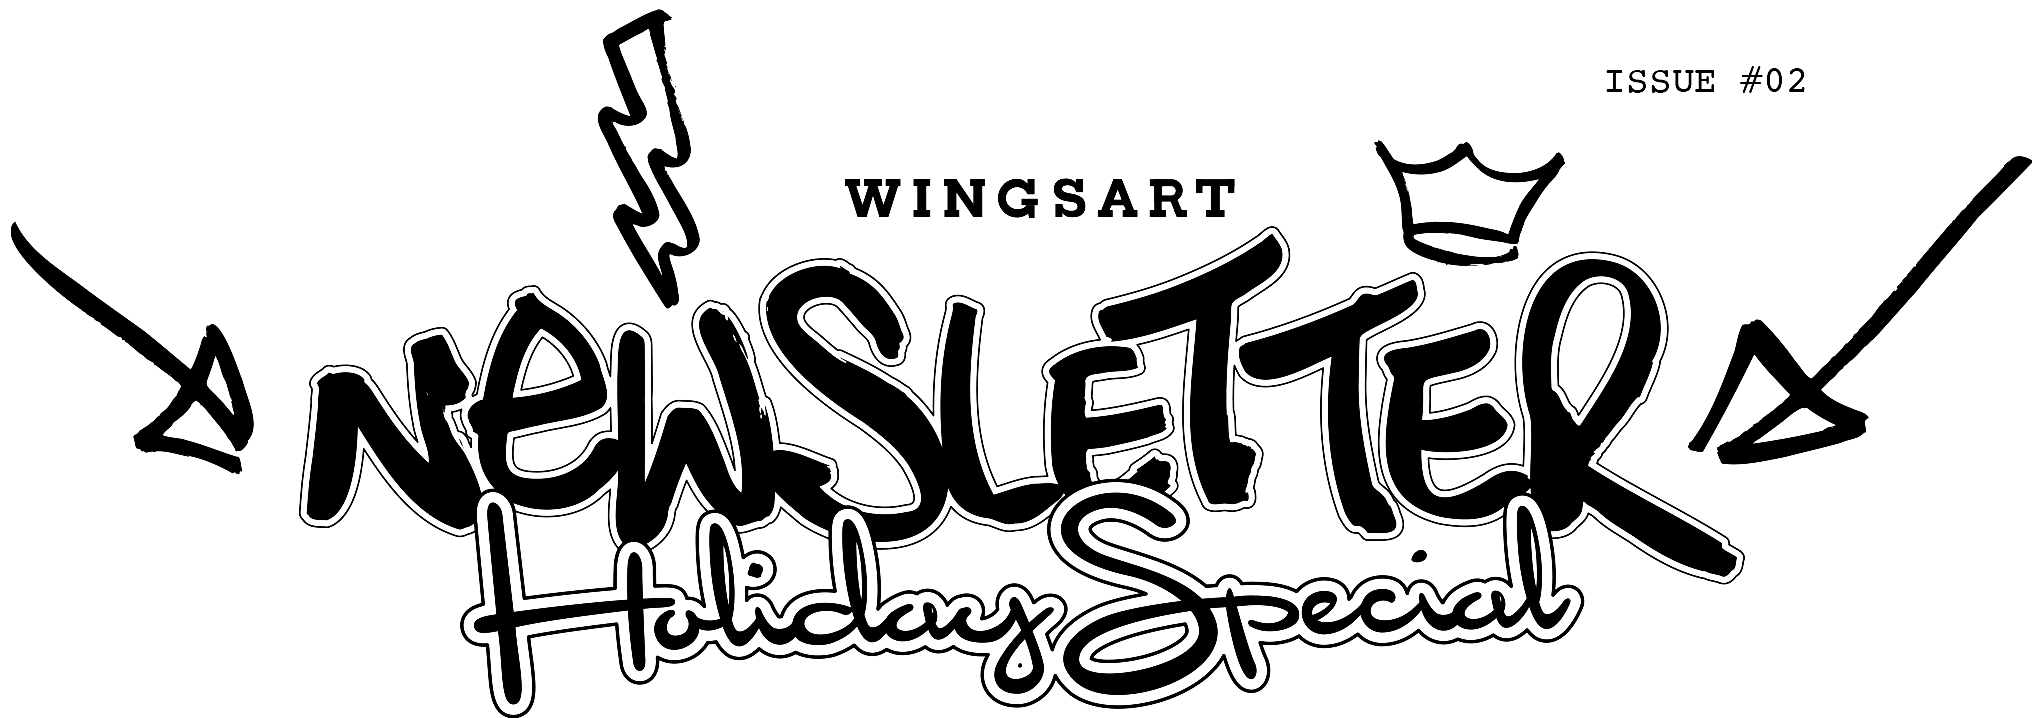 The Wingsart Newsletter Holiday Special